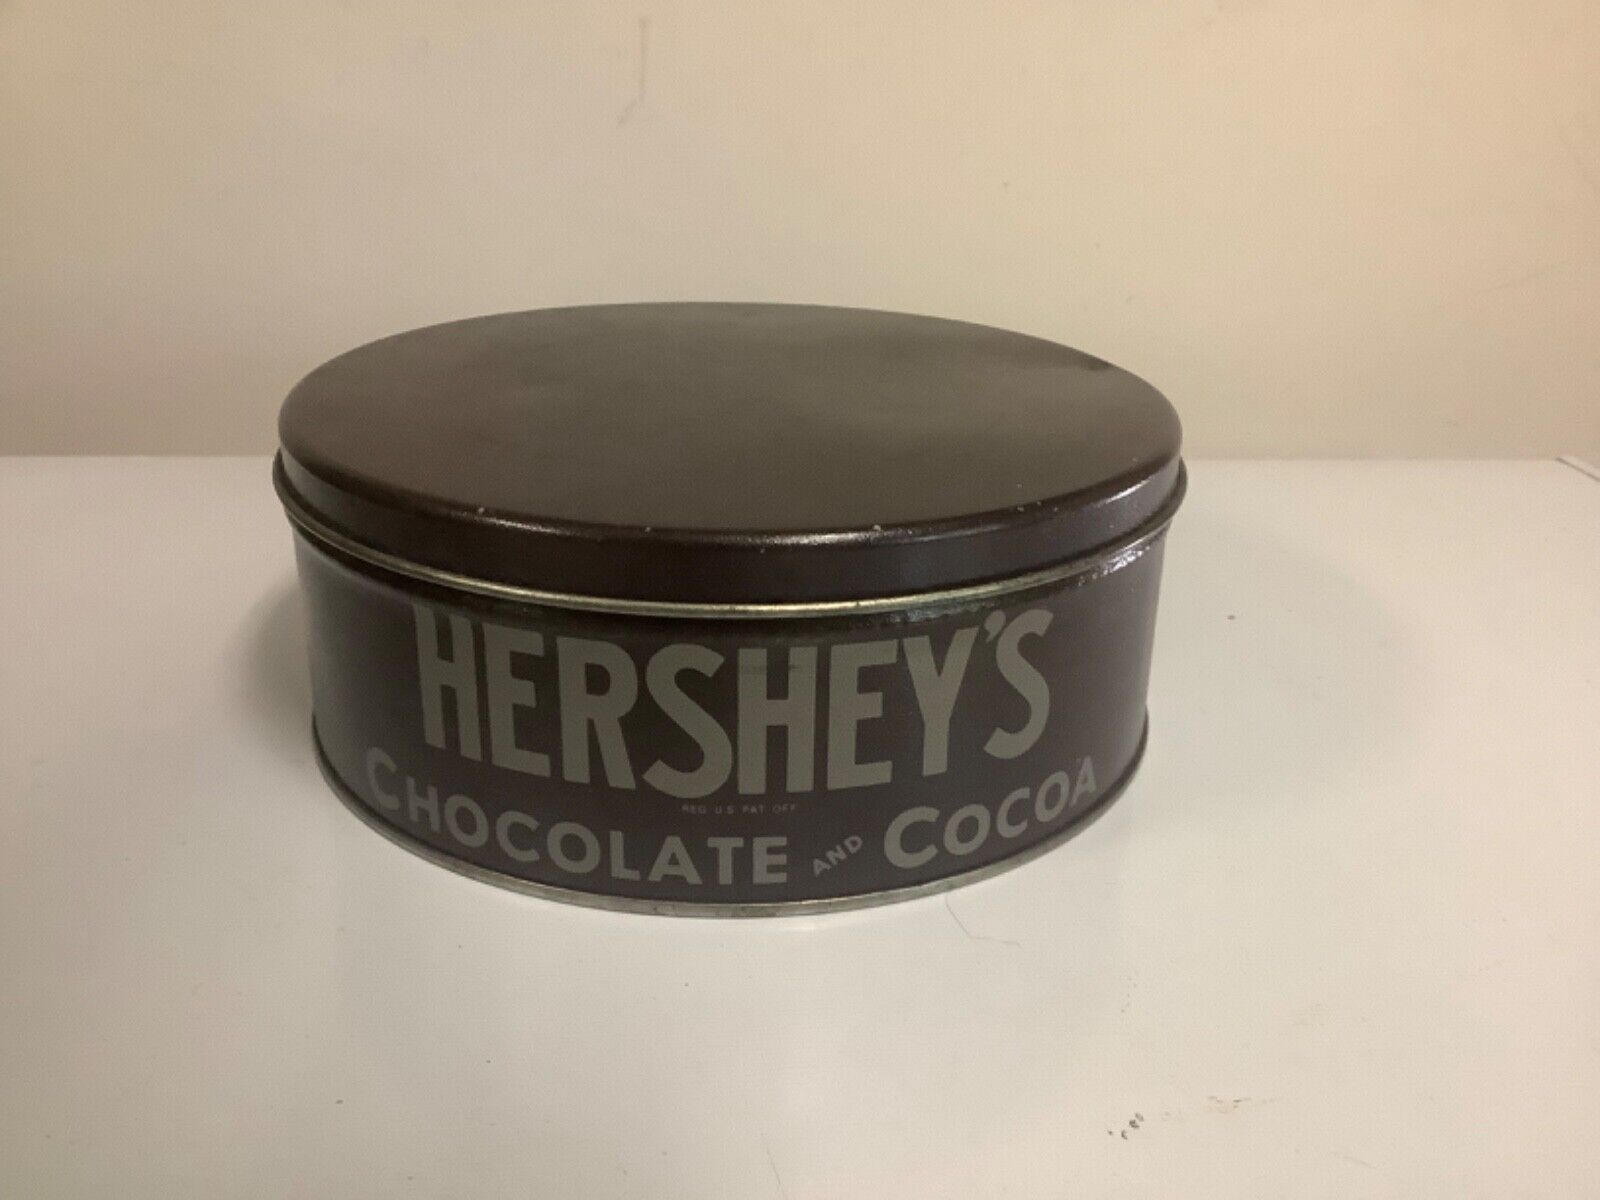 ANTIQUE VINTAGE COUNTRY STORE HERSHEY'S CHOCOLATE & COCOA TIN